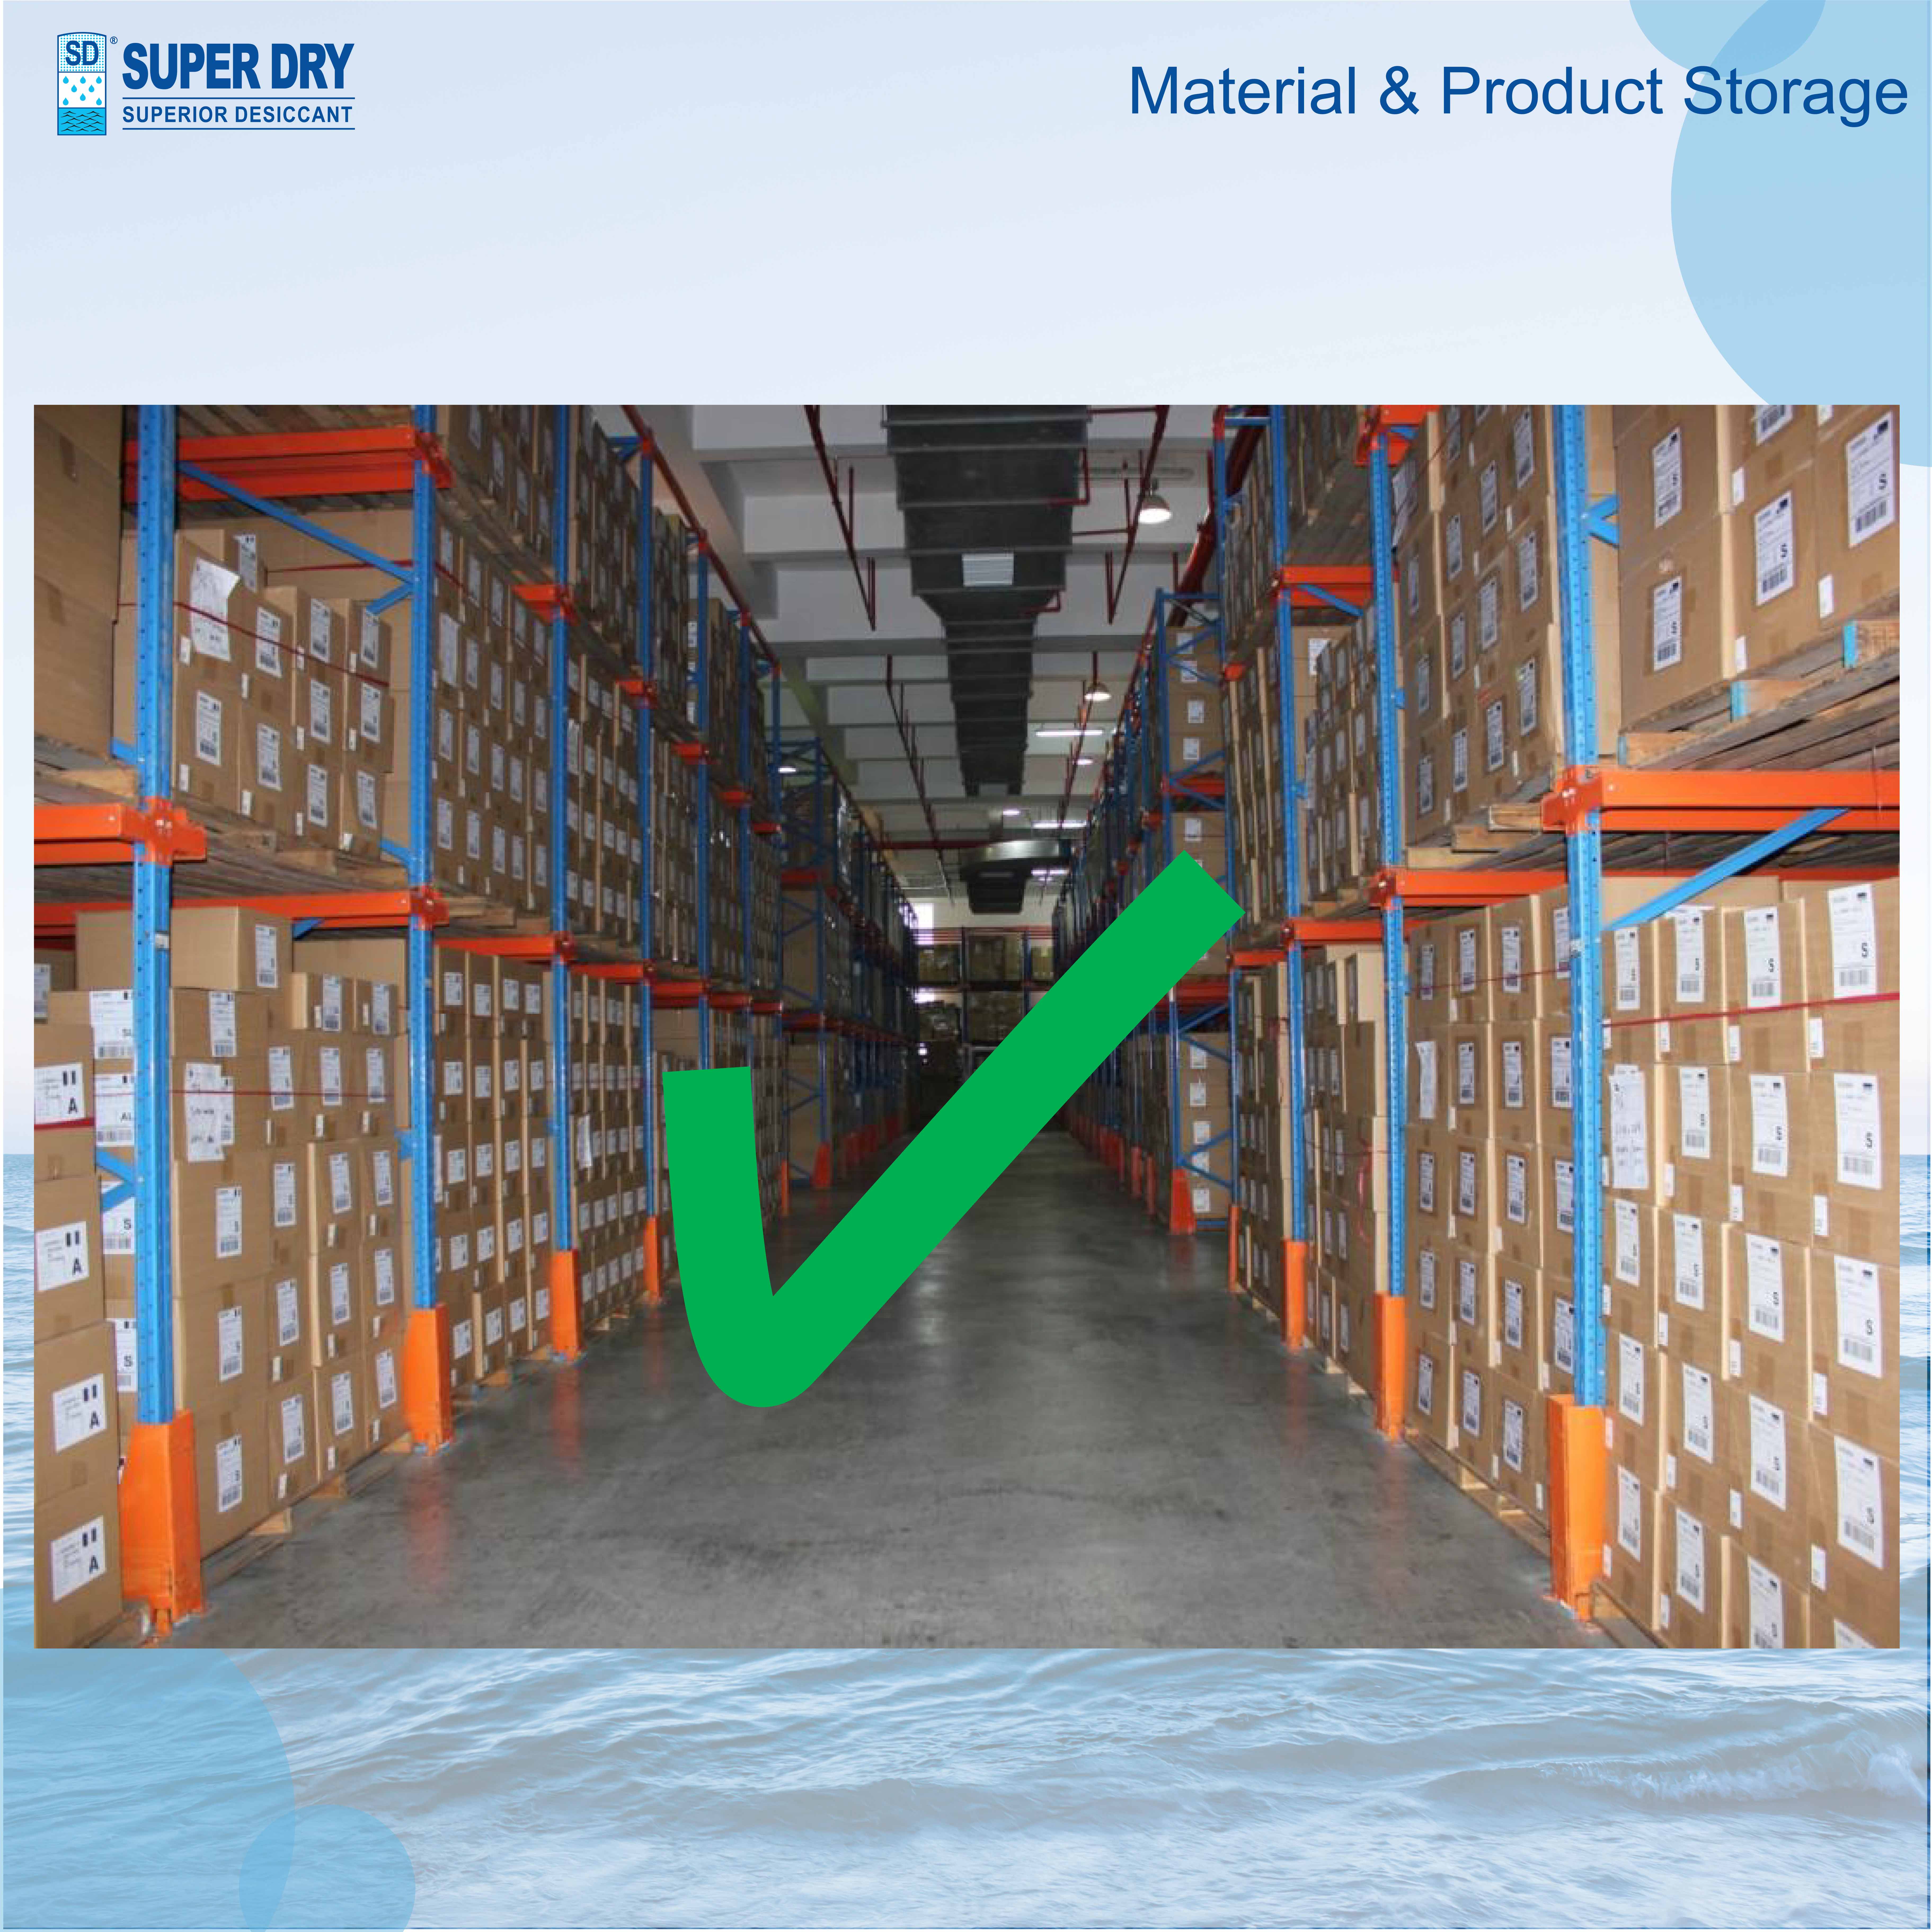 #Material & Product Storage II